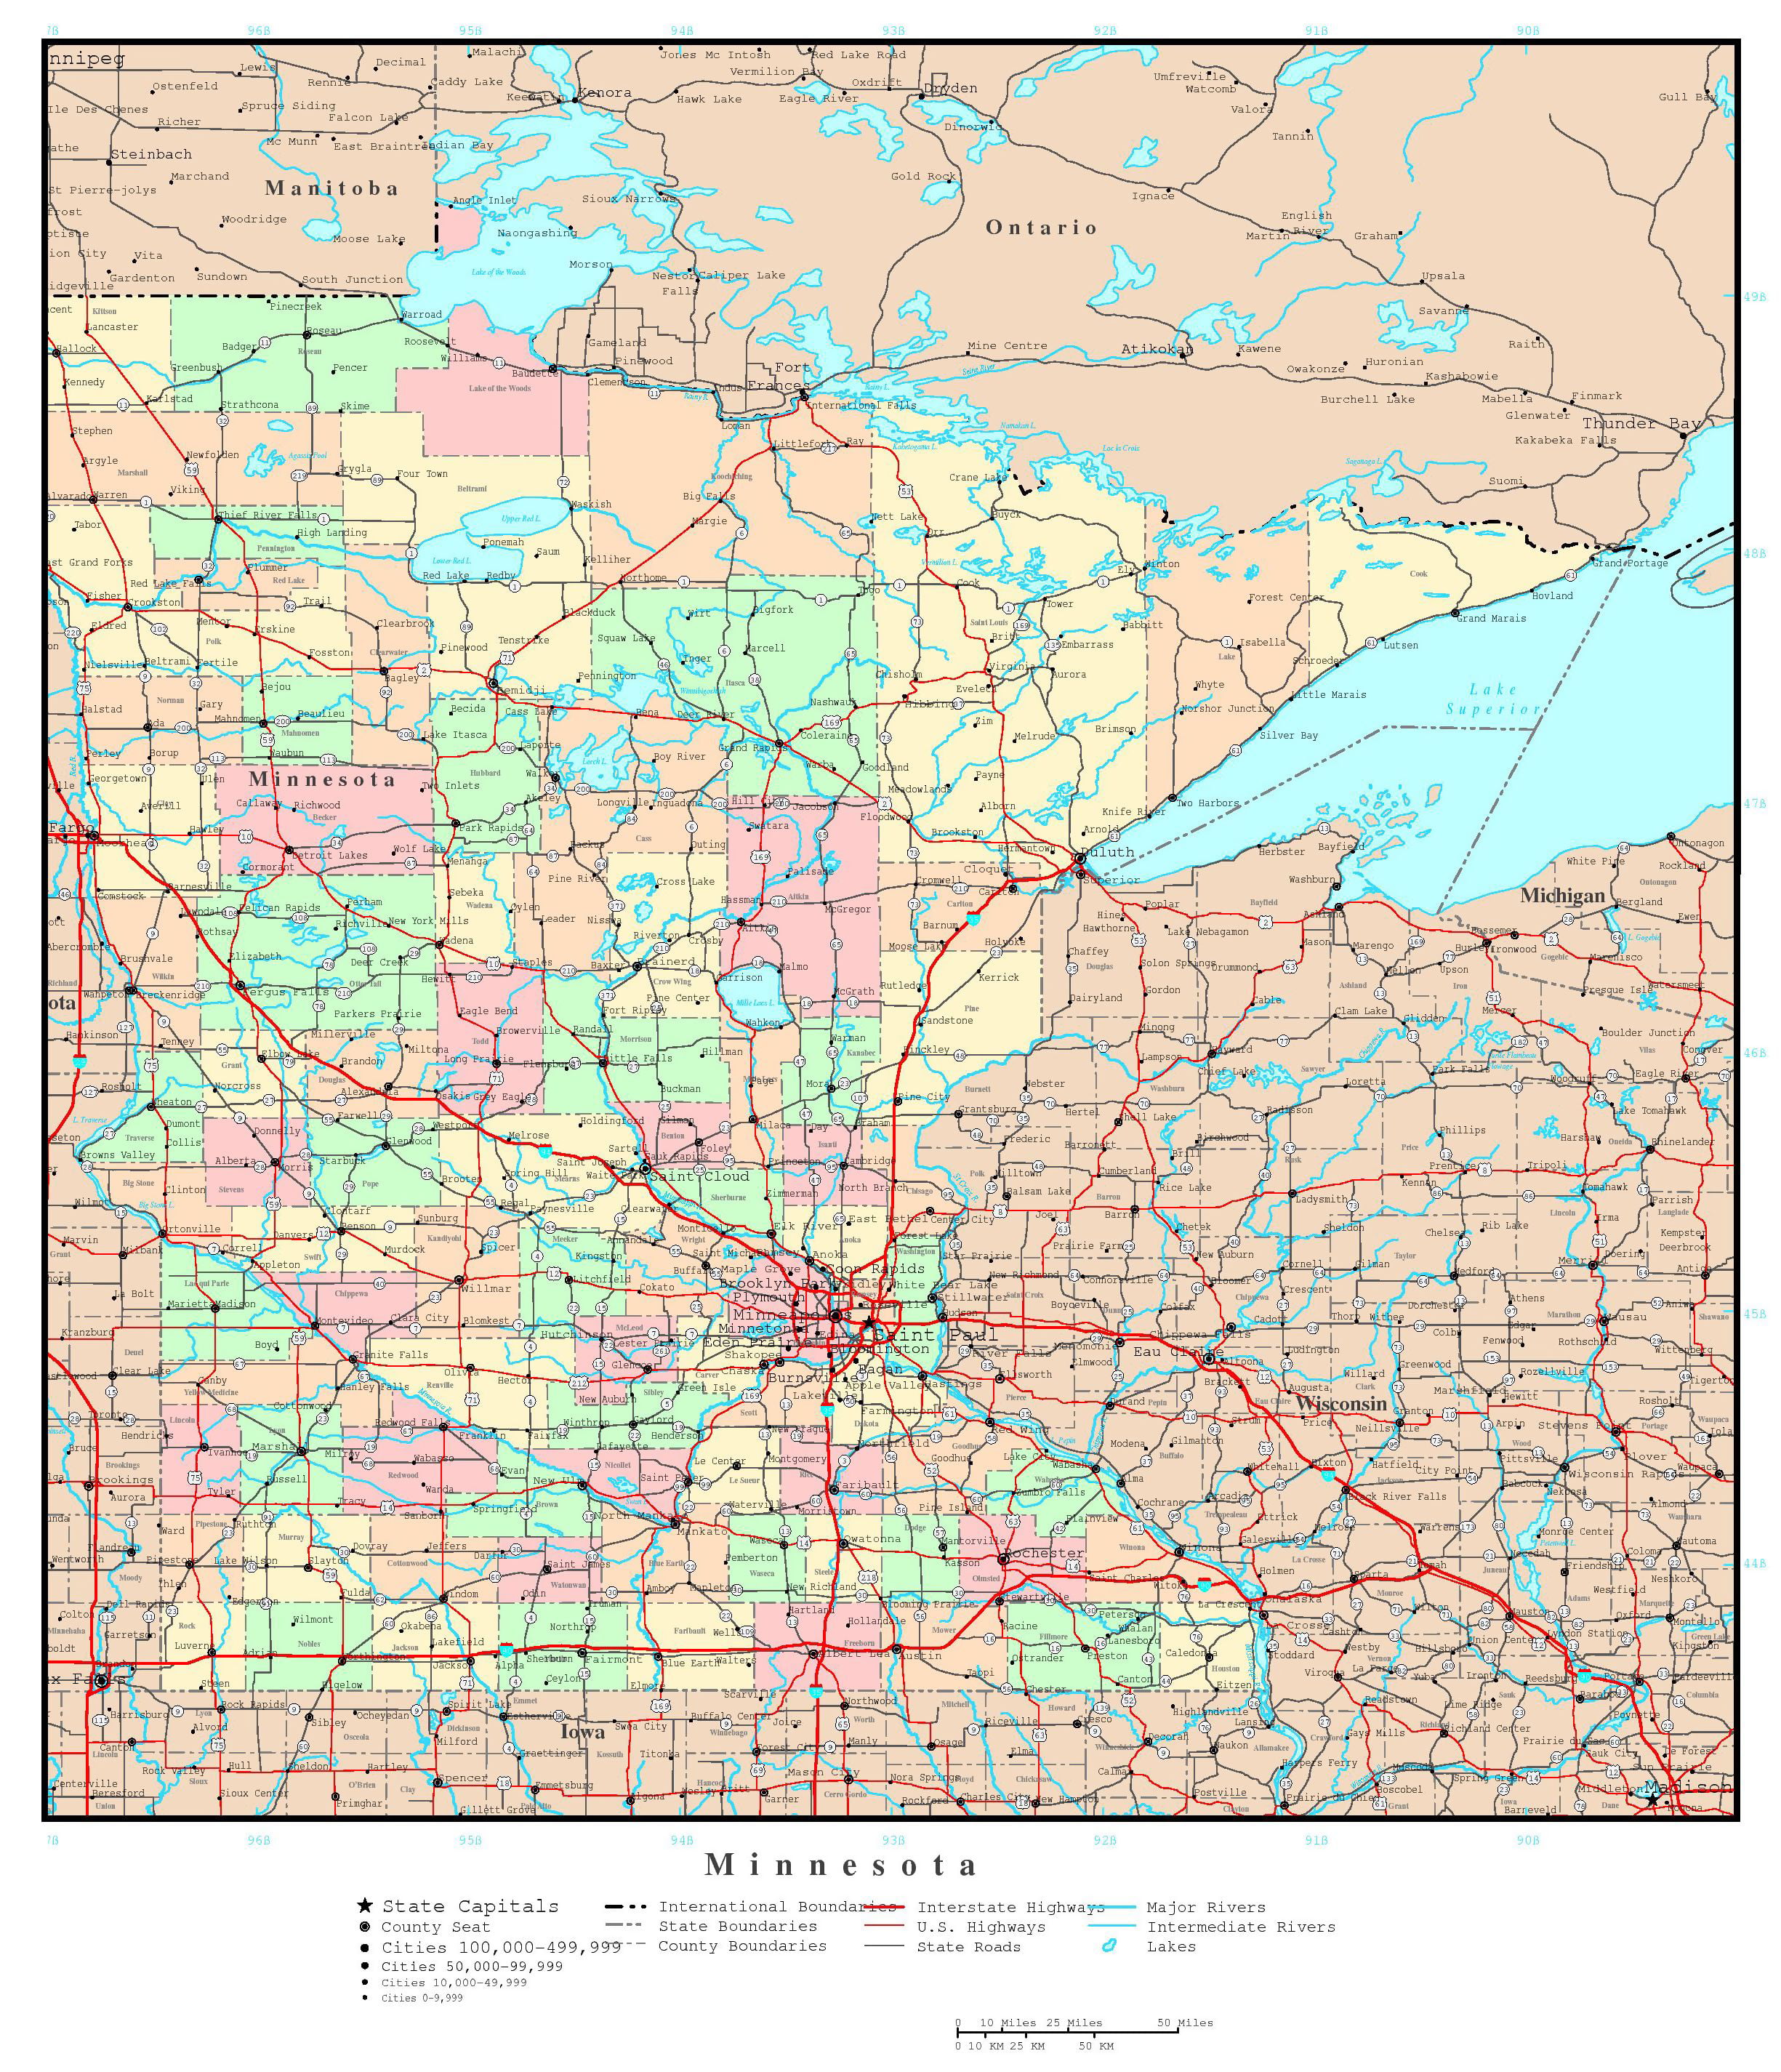 Laminated Map - Large detailed administrative map of Minnesota state